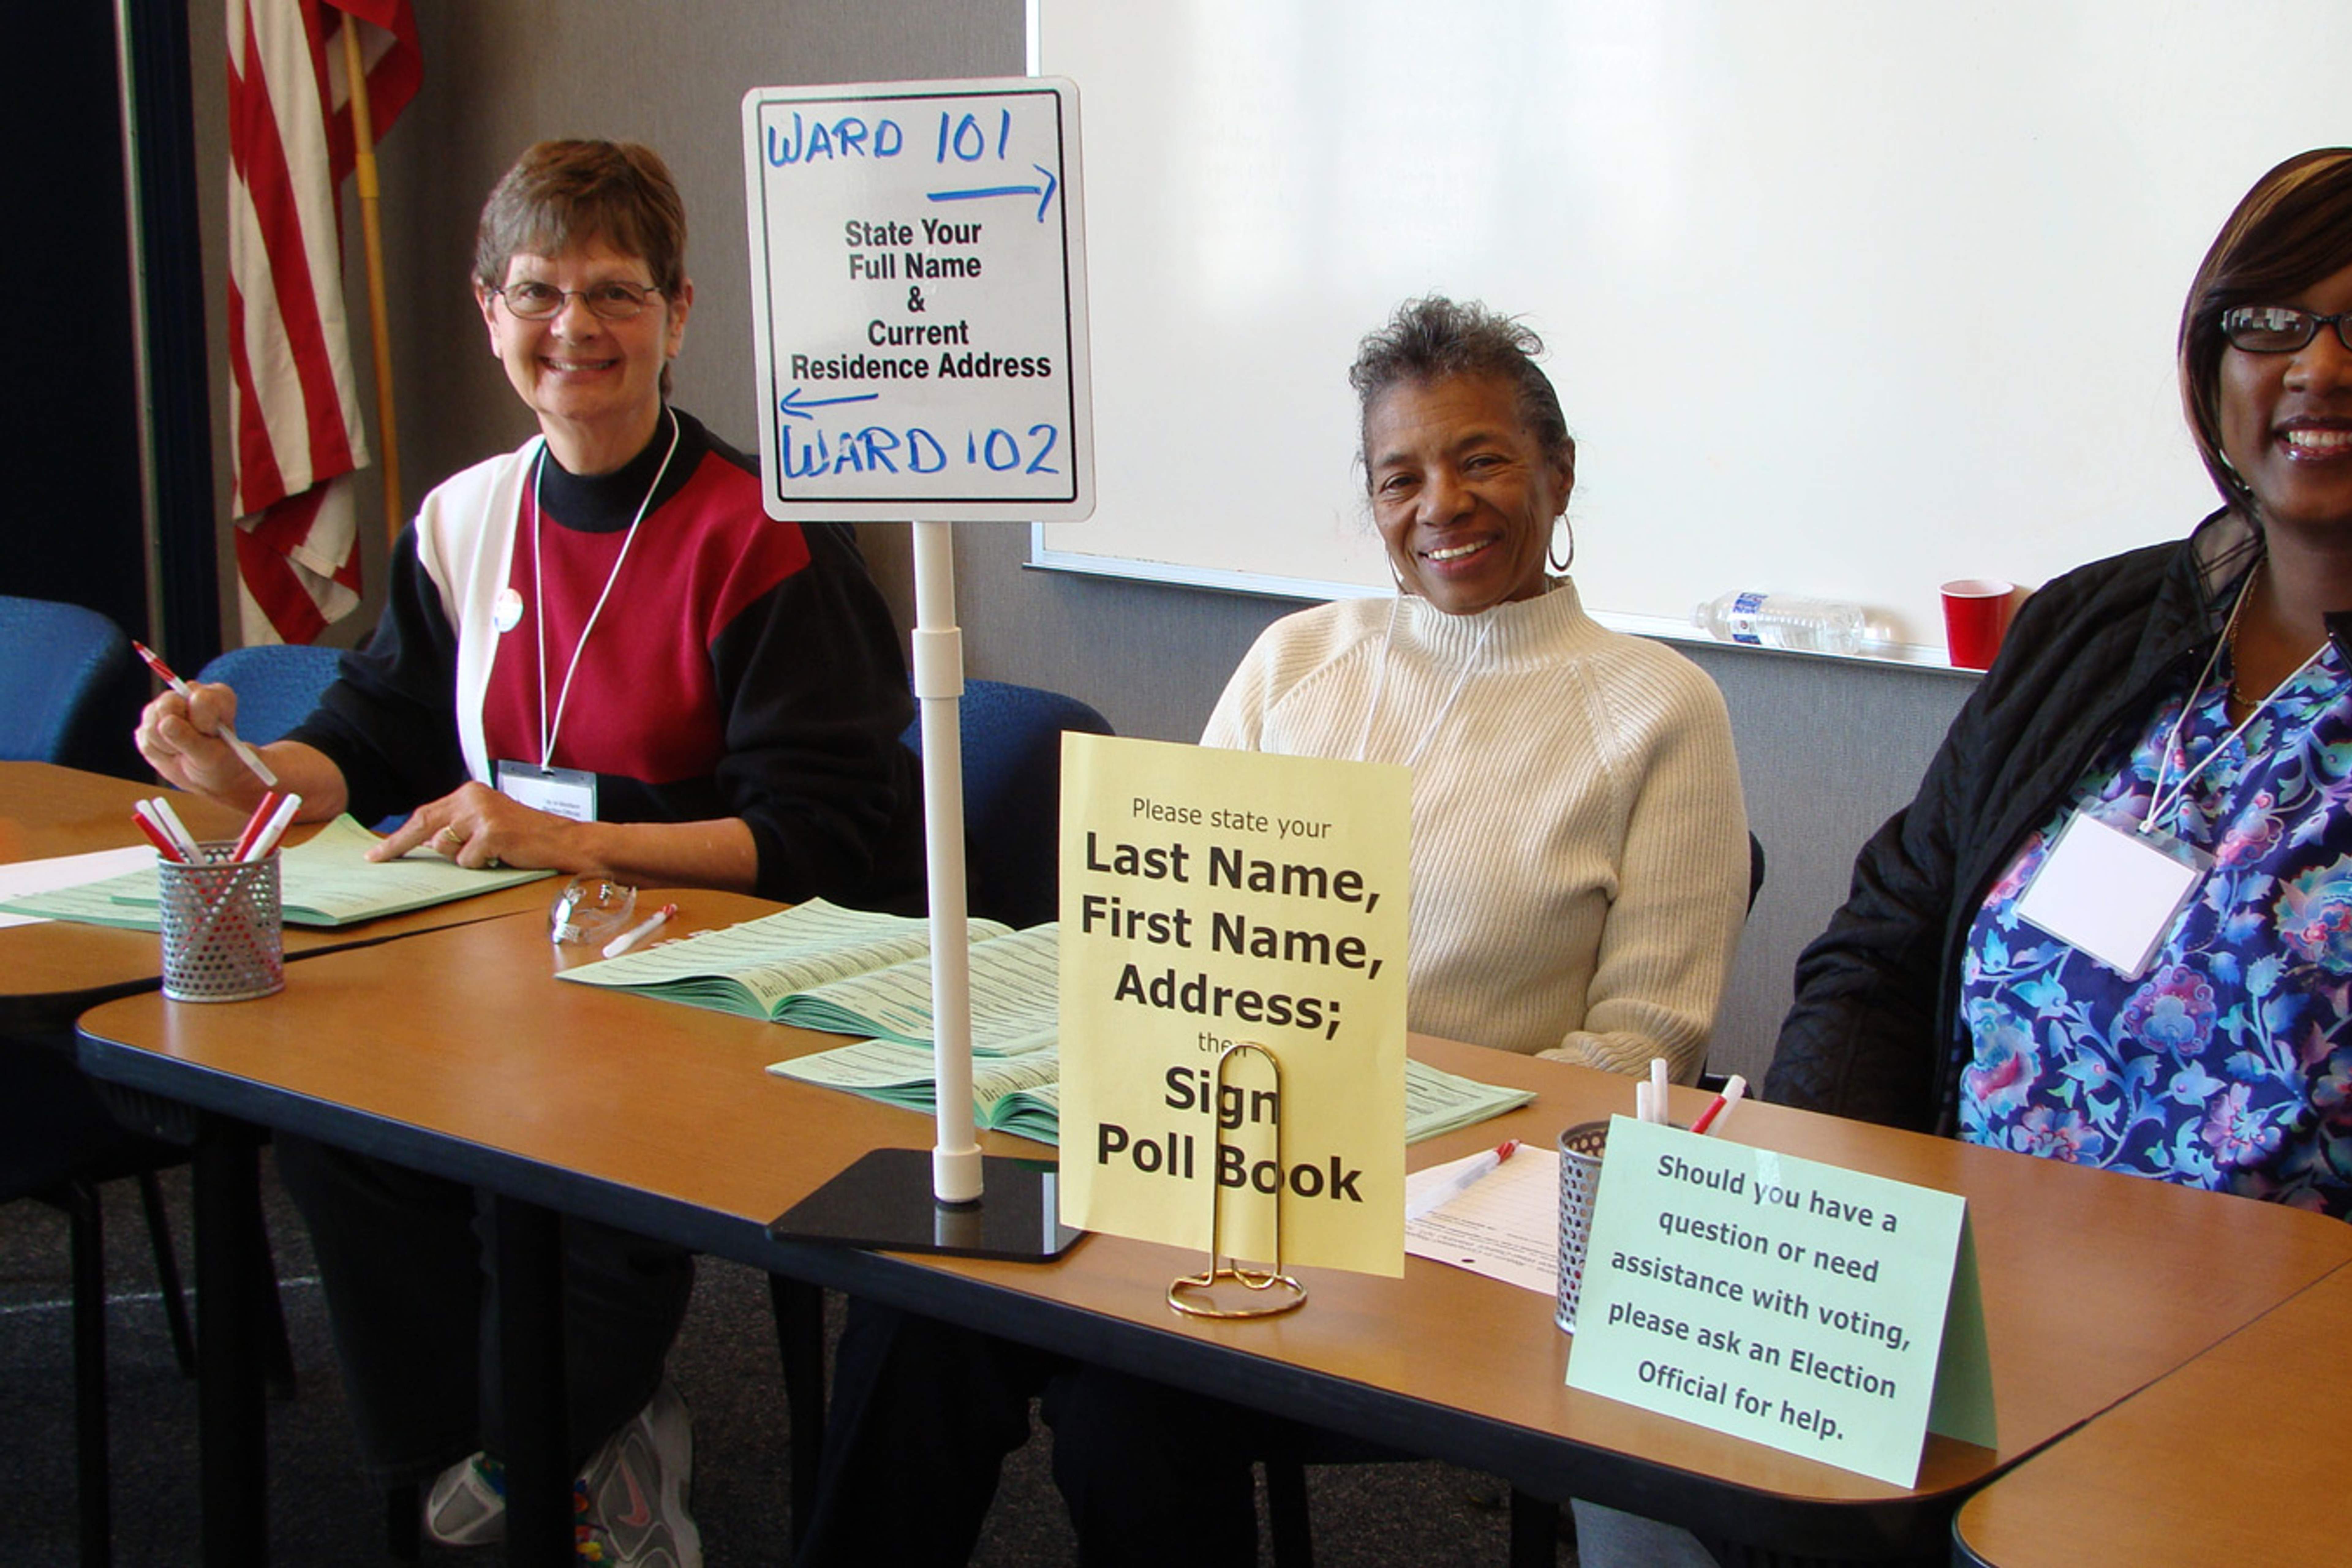 Three poll workers seated at a polling place in Madison, Wisconsin